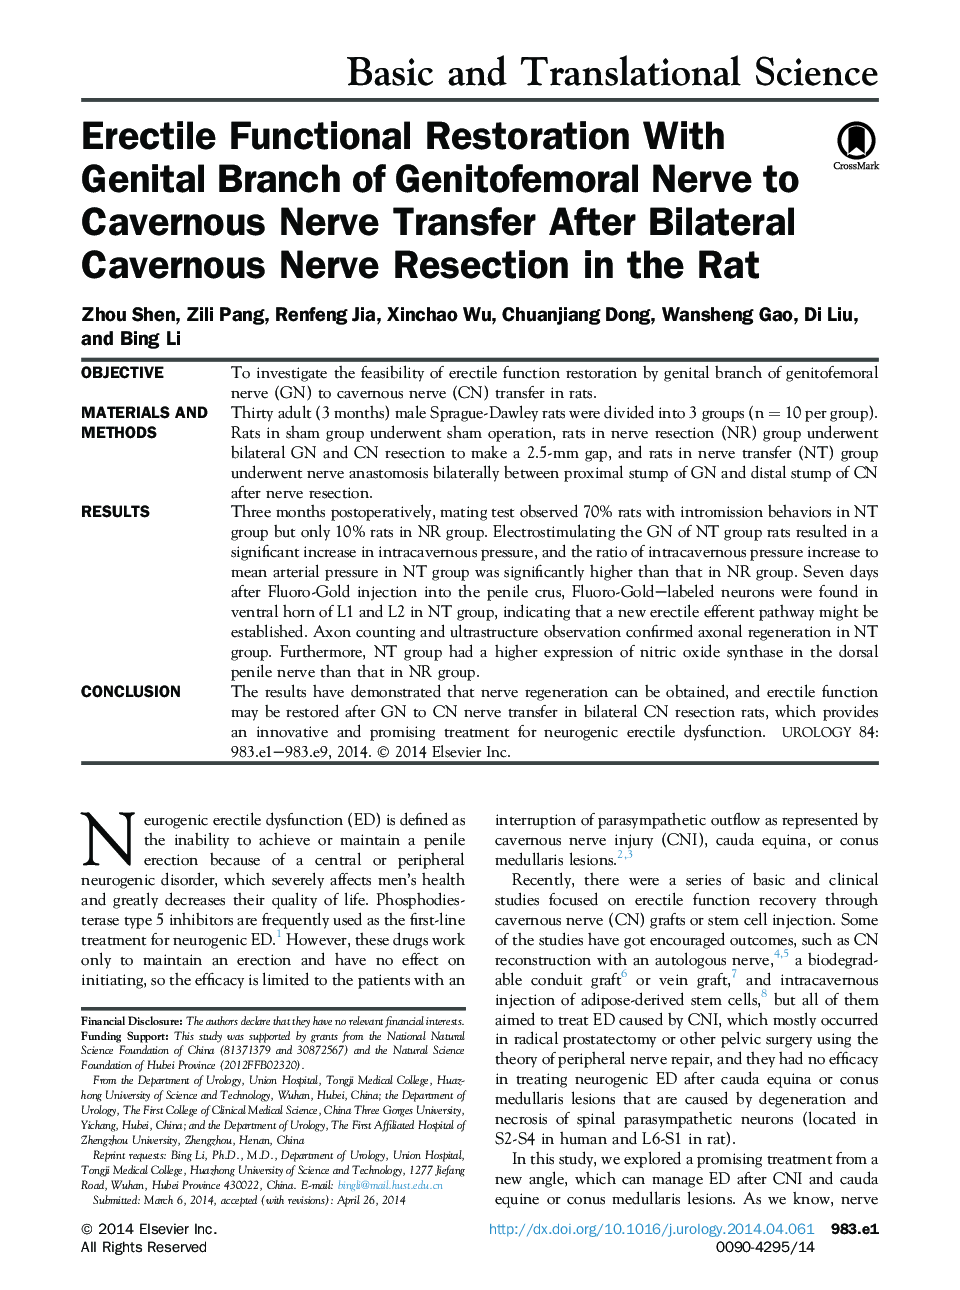 Erectile Functional Restoration With Genital Branch of Genitofemoral Nerve to Cavernous Nerve Transfer After Bilateral Cavernous Nerve Resection in the Rat